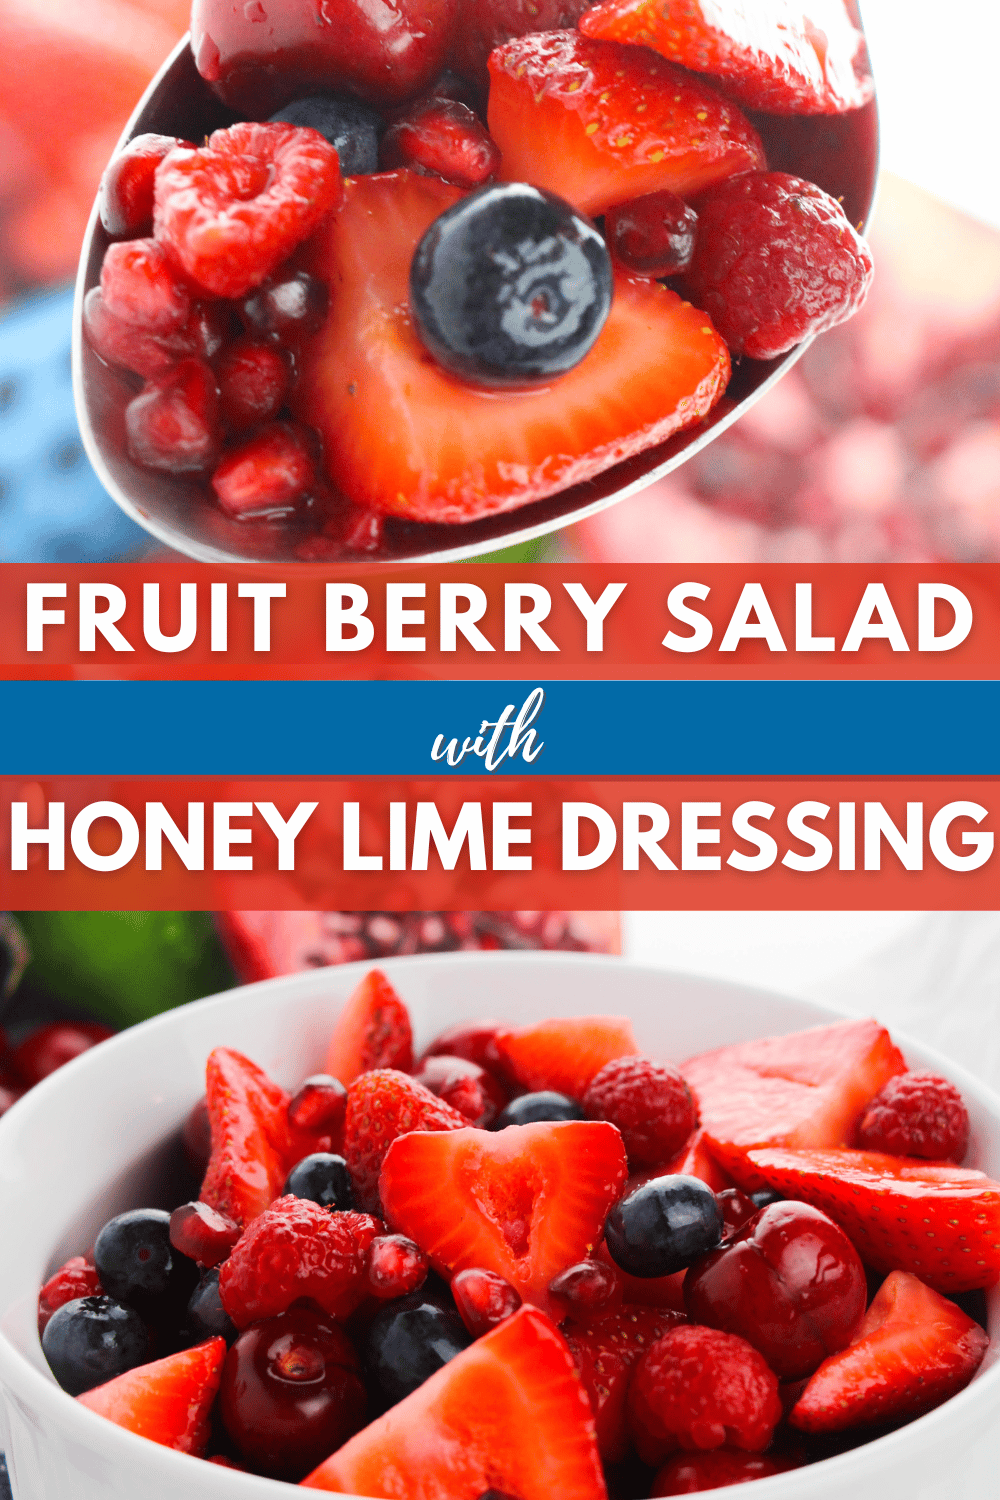 This Fruit Berry Salad with Honey Lime Dressing is a light and refreshing salad that is perfect for summer! It will be a hit with everyone! #fruitberrysalad #honeylimedressing #salad #summer #recipe via @wondermomwannab